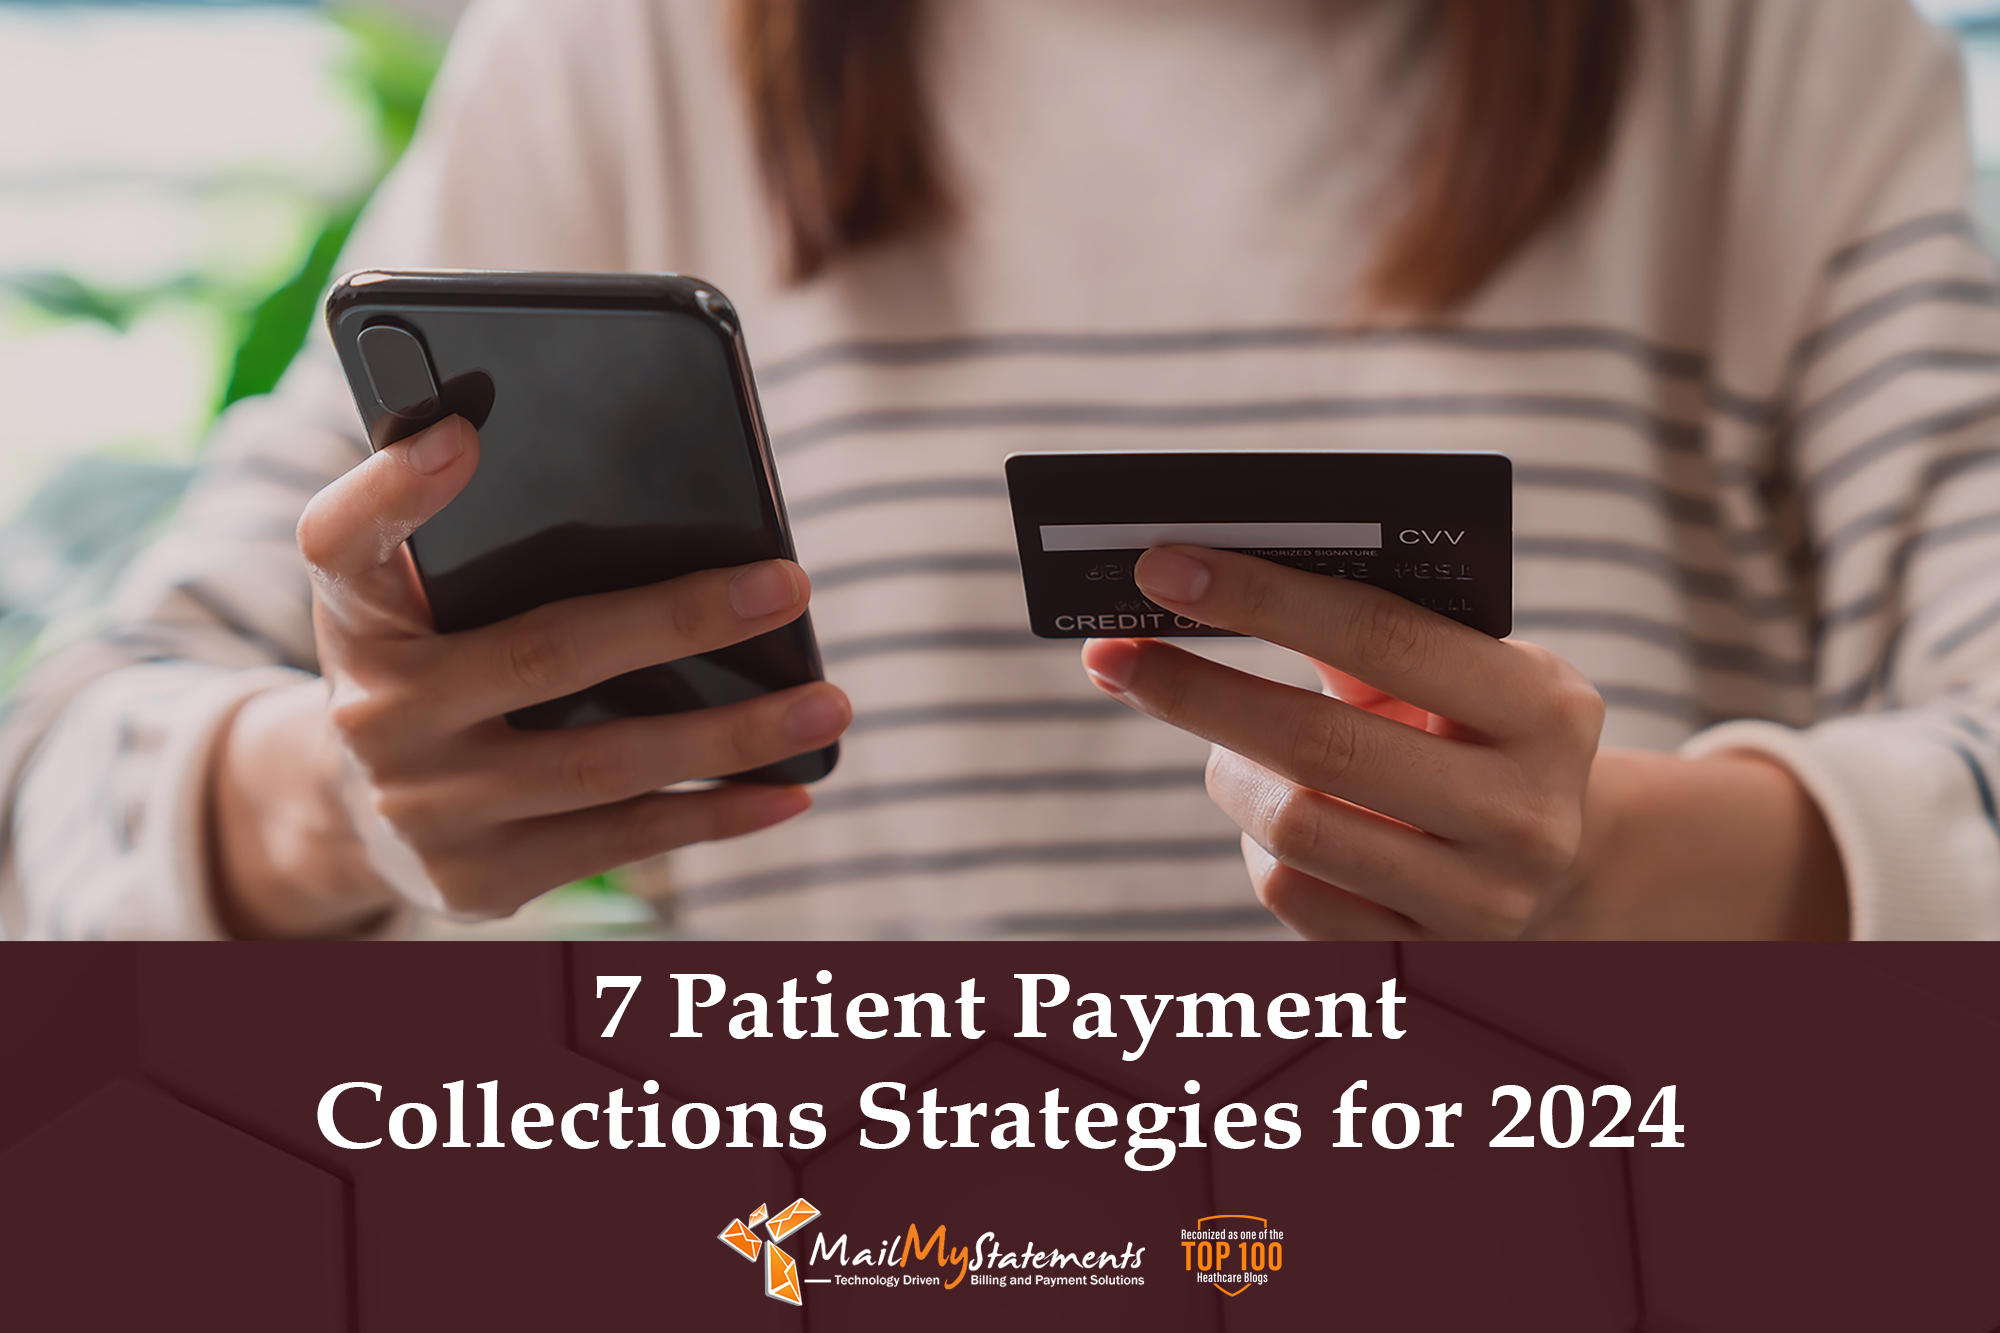 7 Patient Payment Collections Strategies for 2024